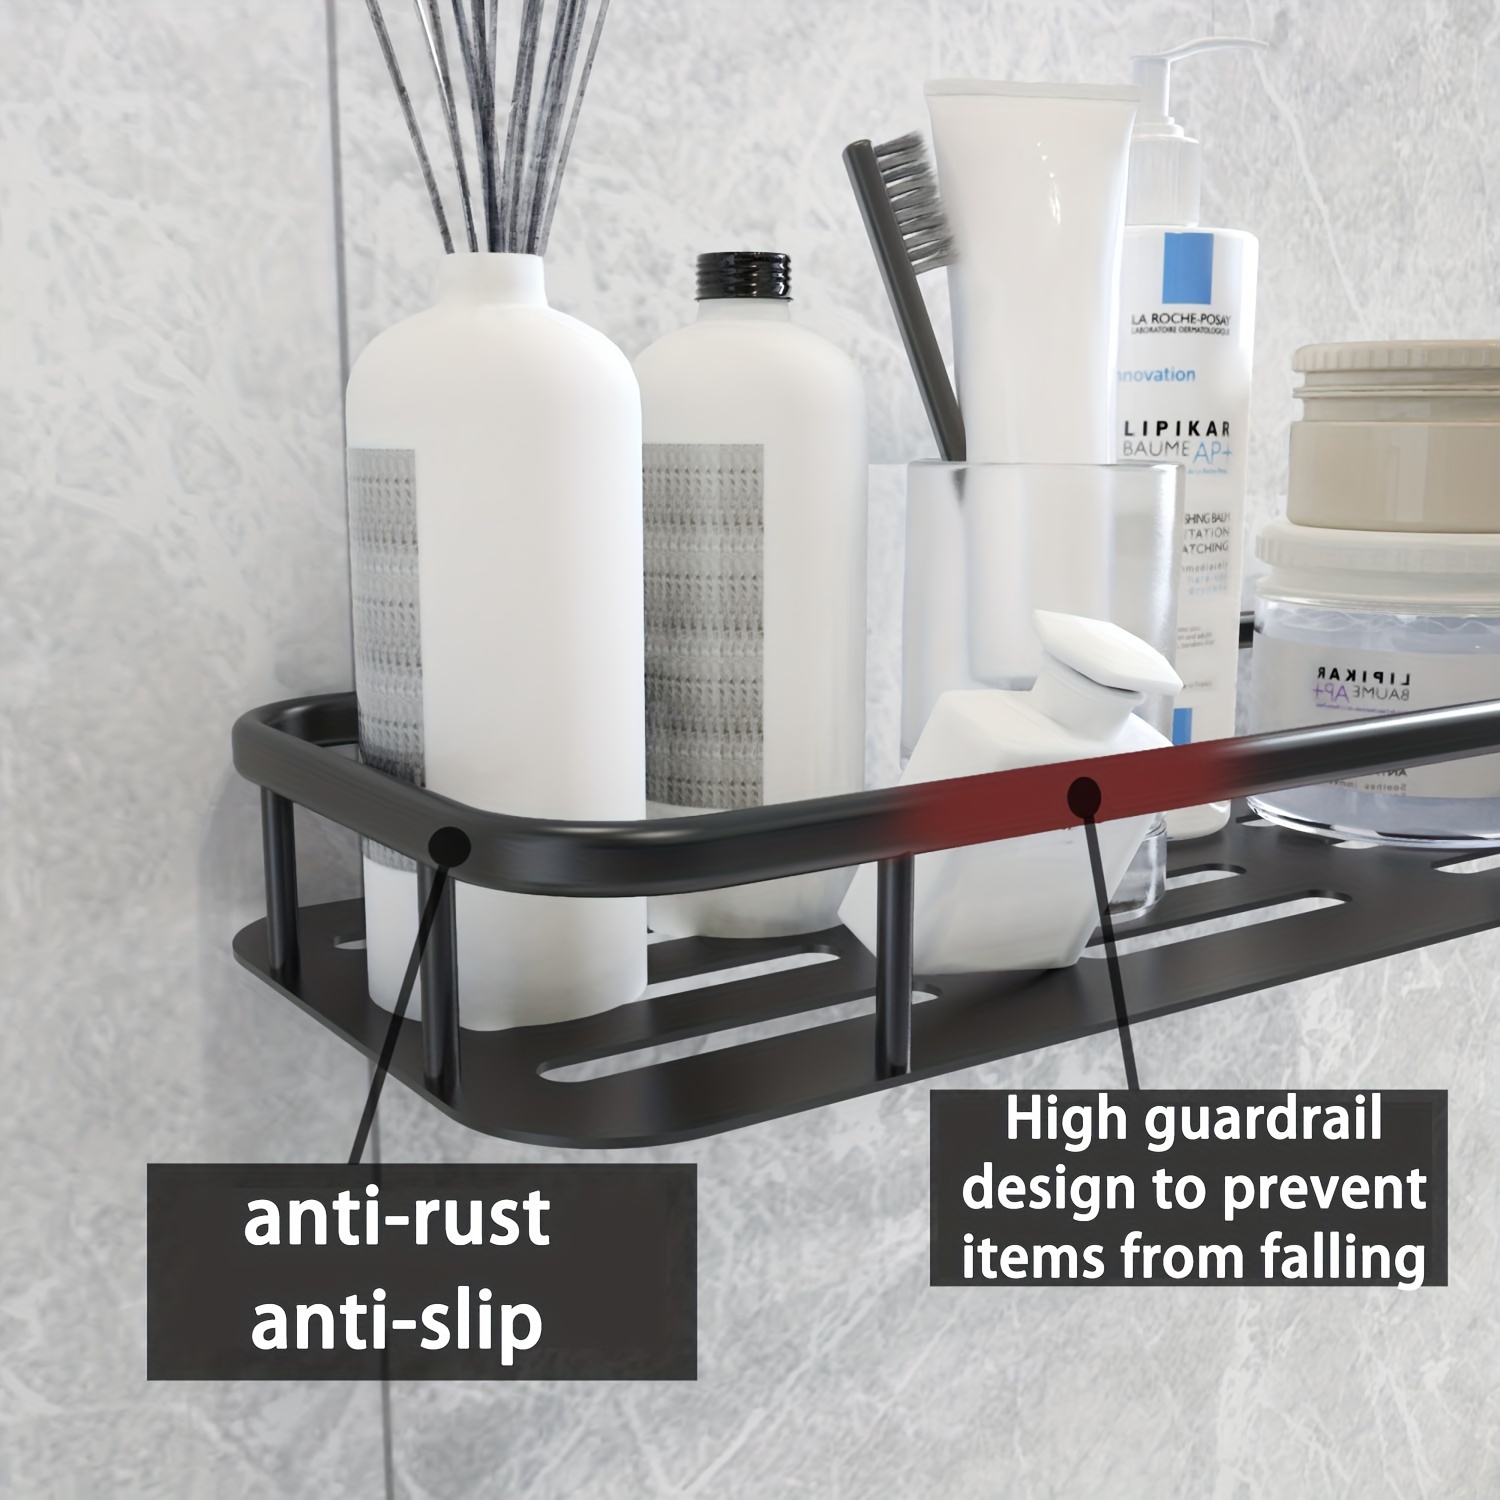 Punch-free Suction Cup Bathroom Shelf, Wall-mounted Aluminum